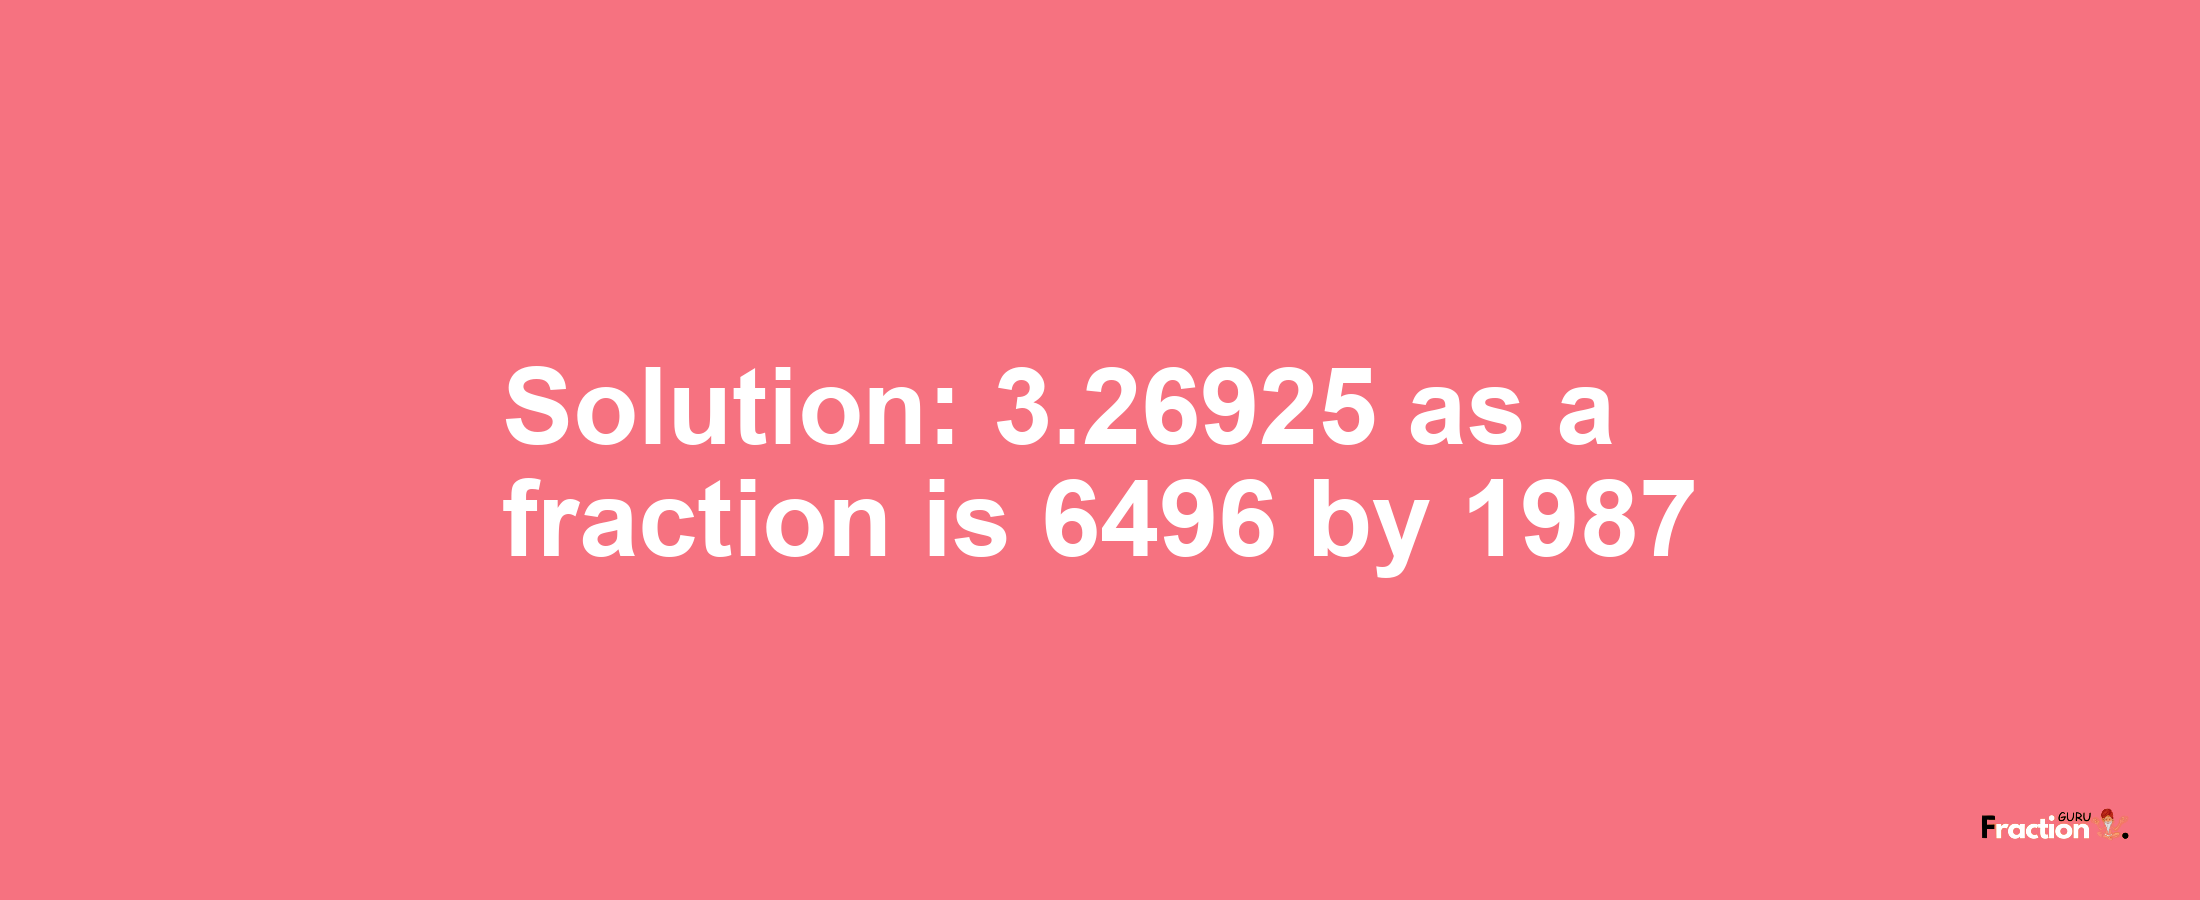 Solution:3.26925 as a fraction is 6496/1987